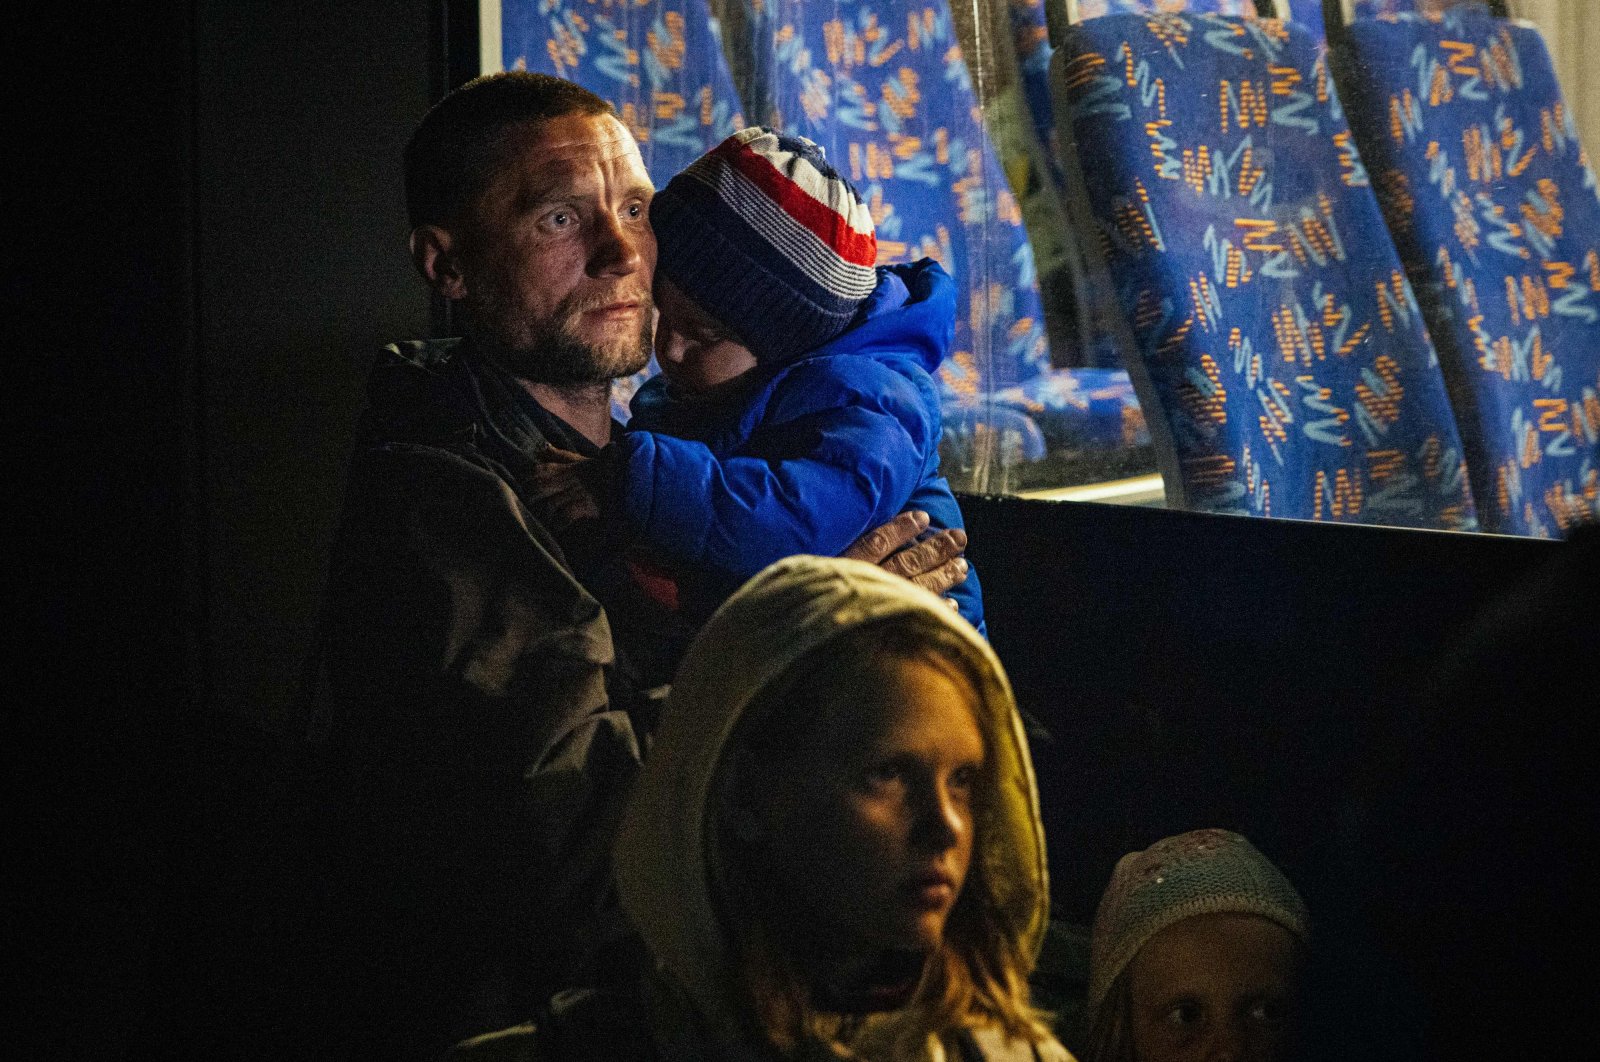 A man and his children arrive from Mariupol at a registration and processing area for internally displaced people, Zaporizhzhia, Ukraine, May 8, 2022. (AFP Photo)